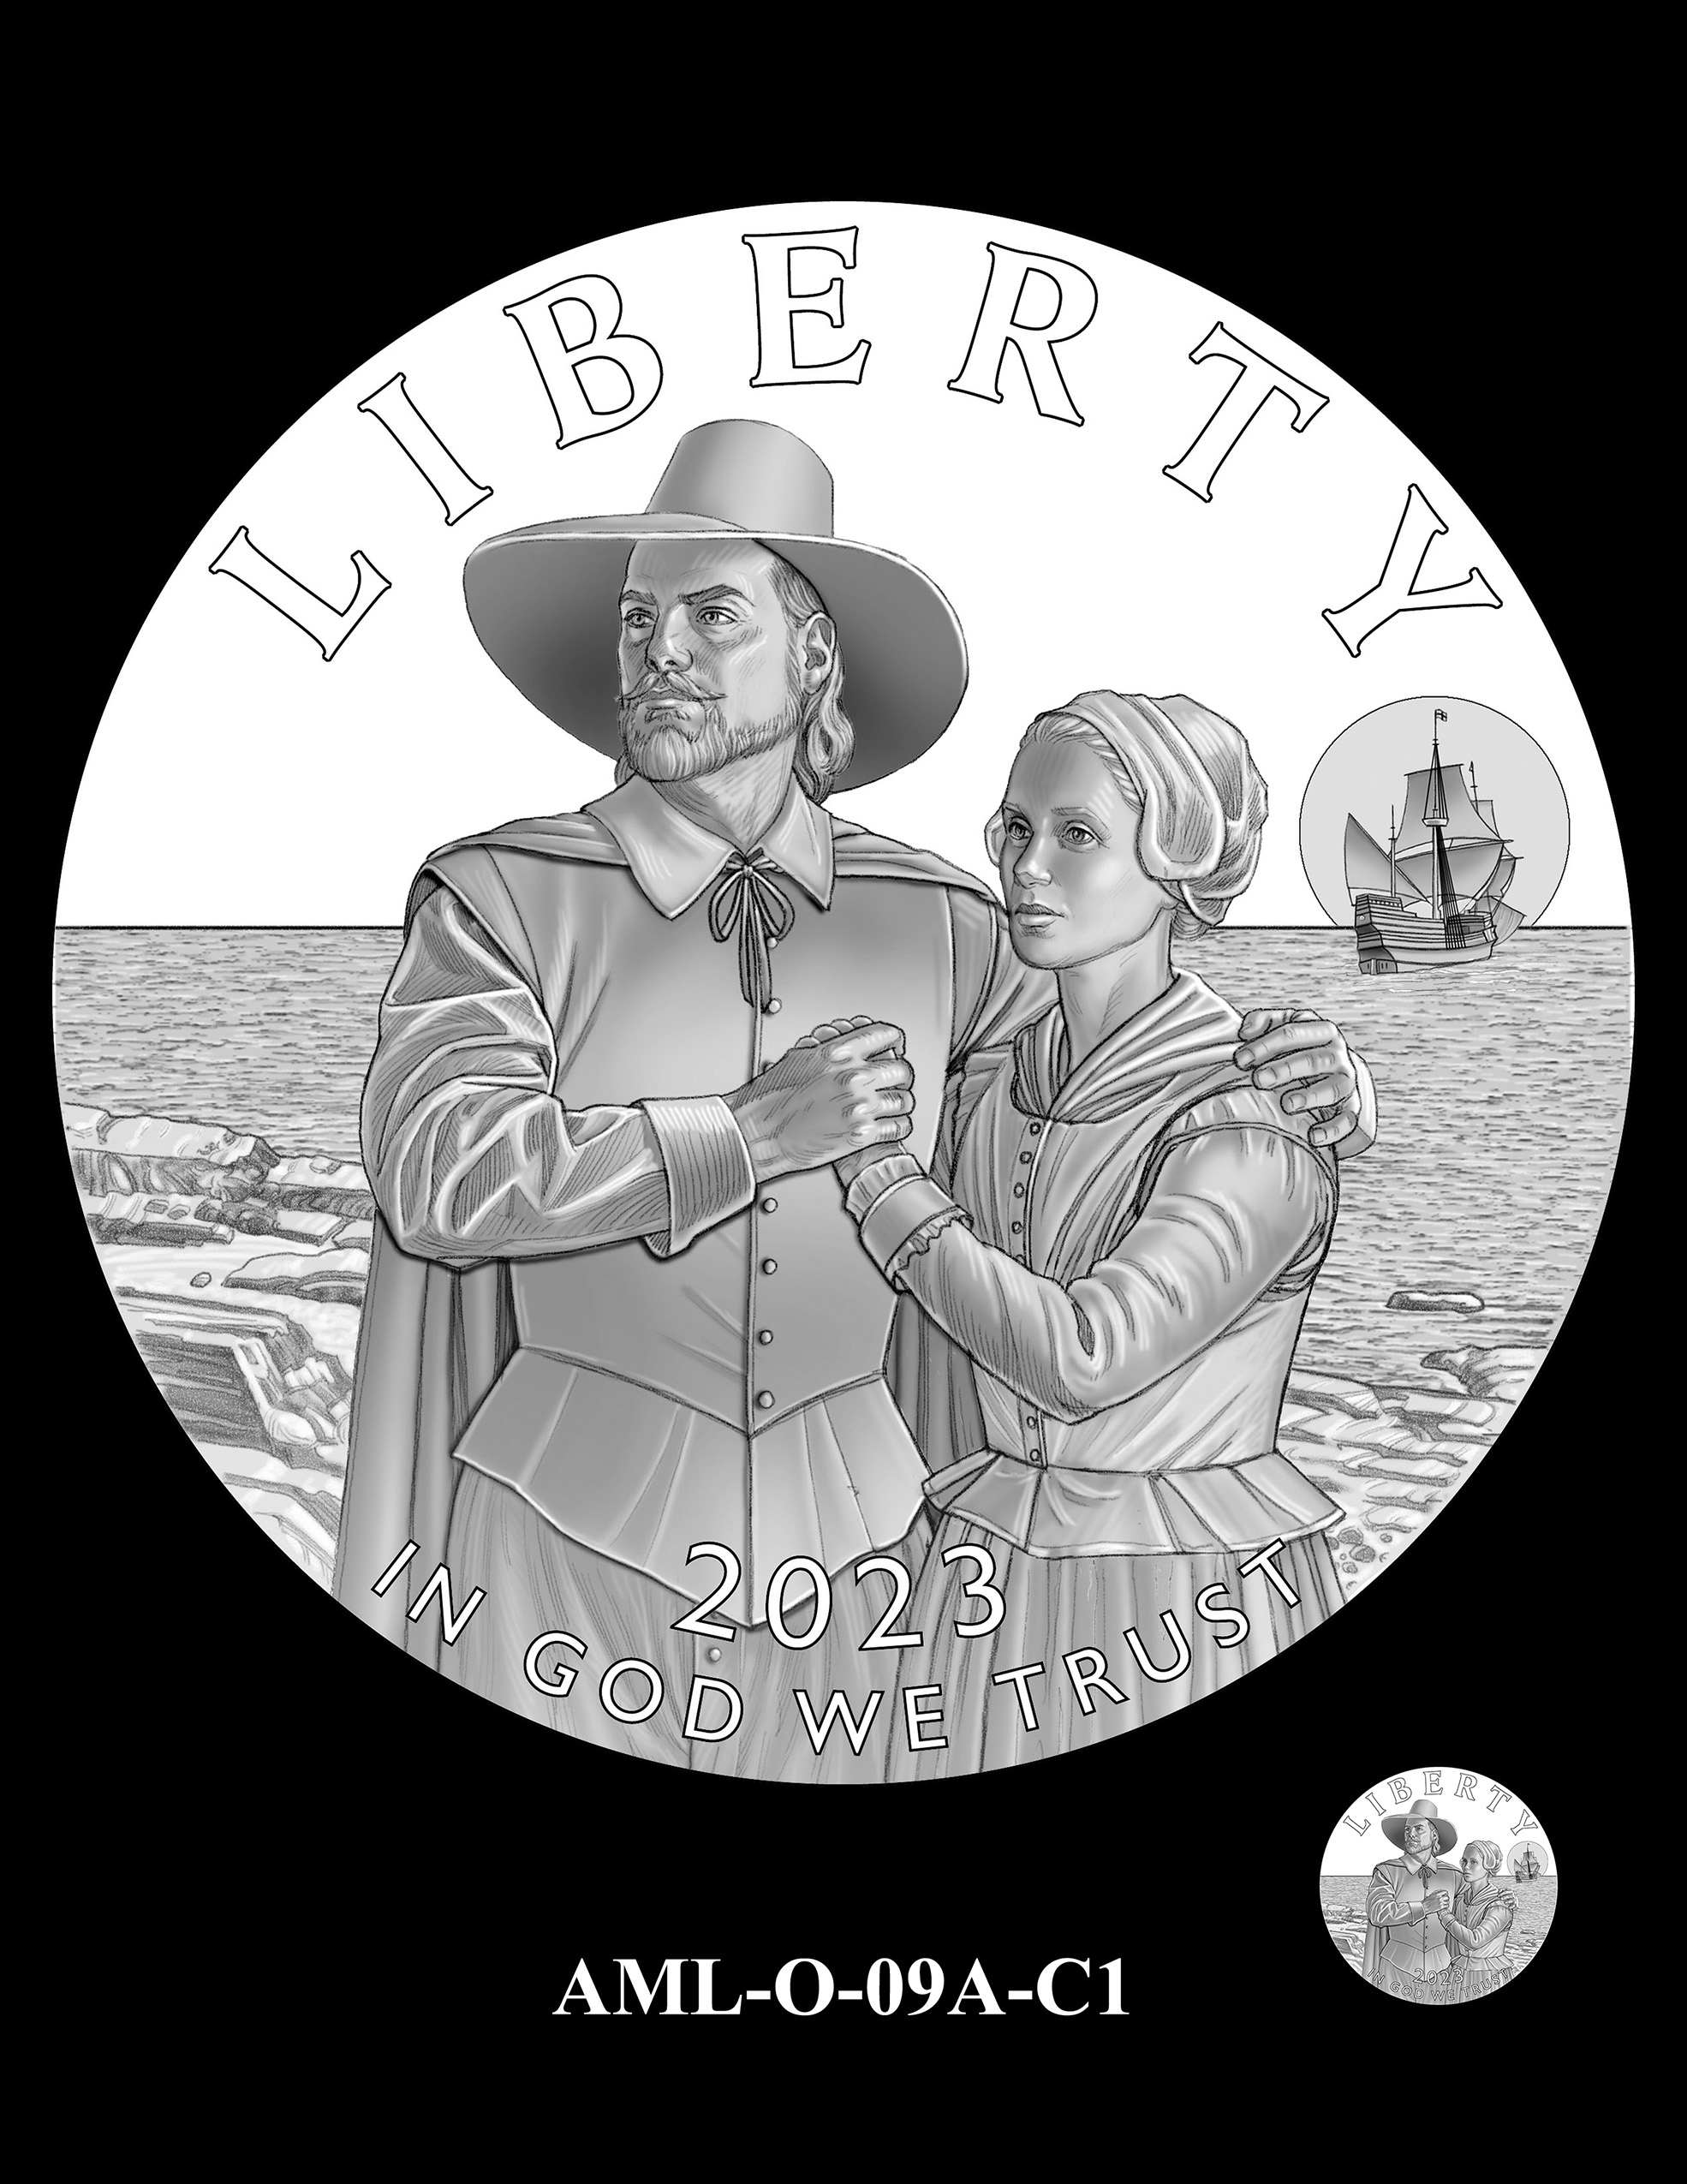 AML-O-09A-C1 -- 2023 American Liberty High Relief 24k Gold and Silver Medal Program